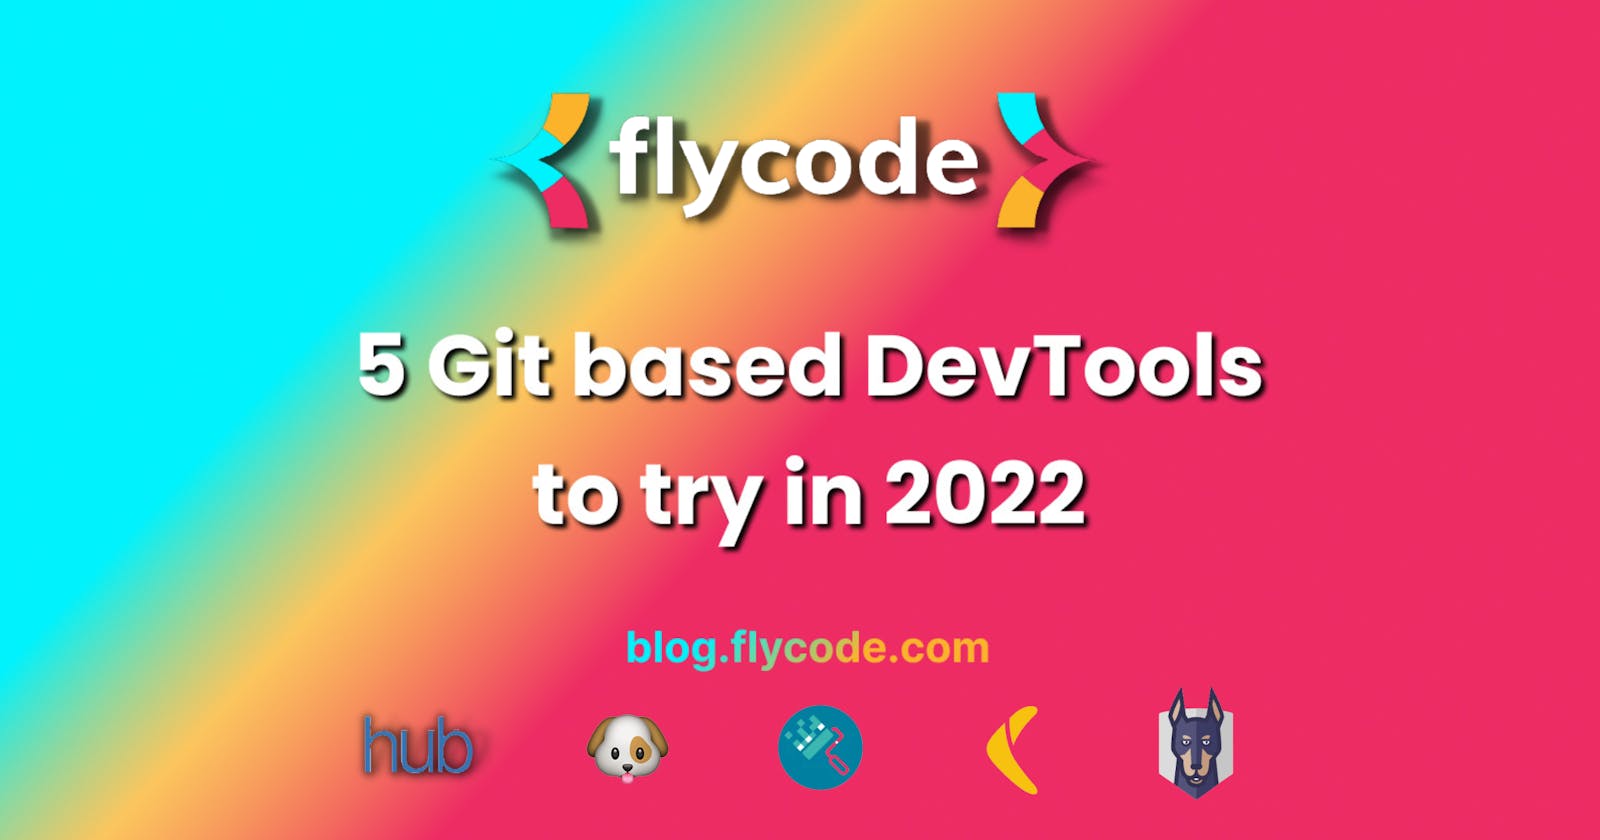 5 Git Based DevTools to Try in 2022